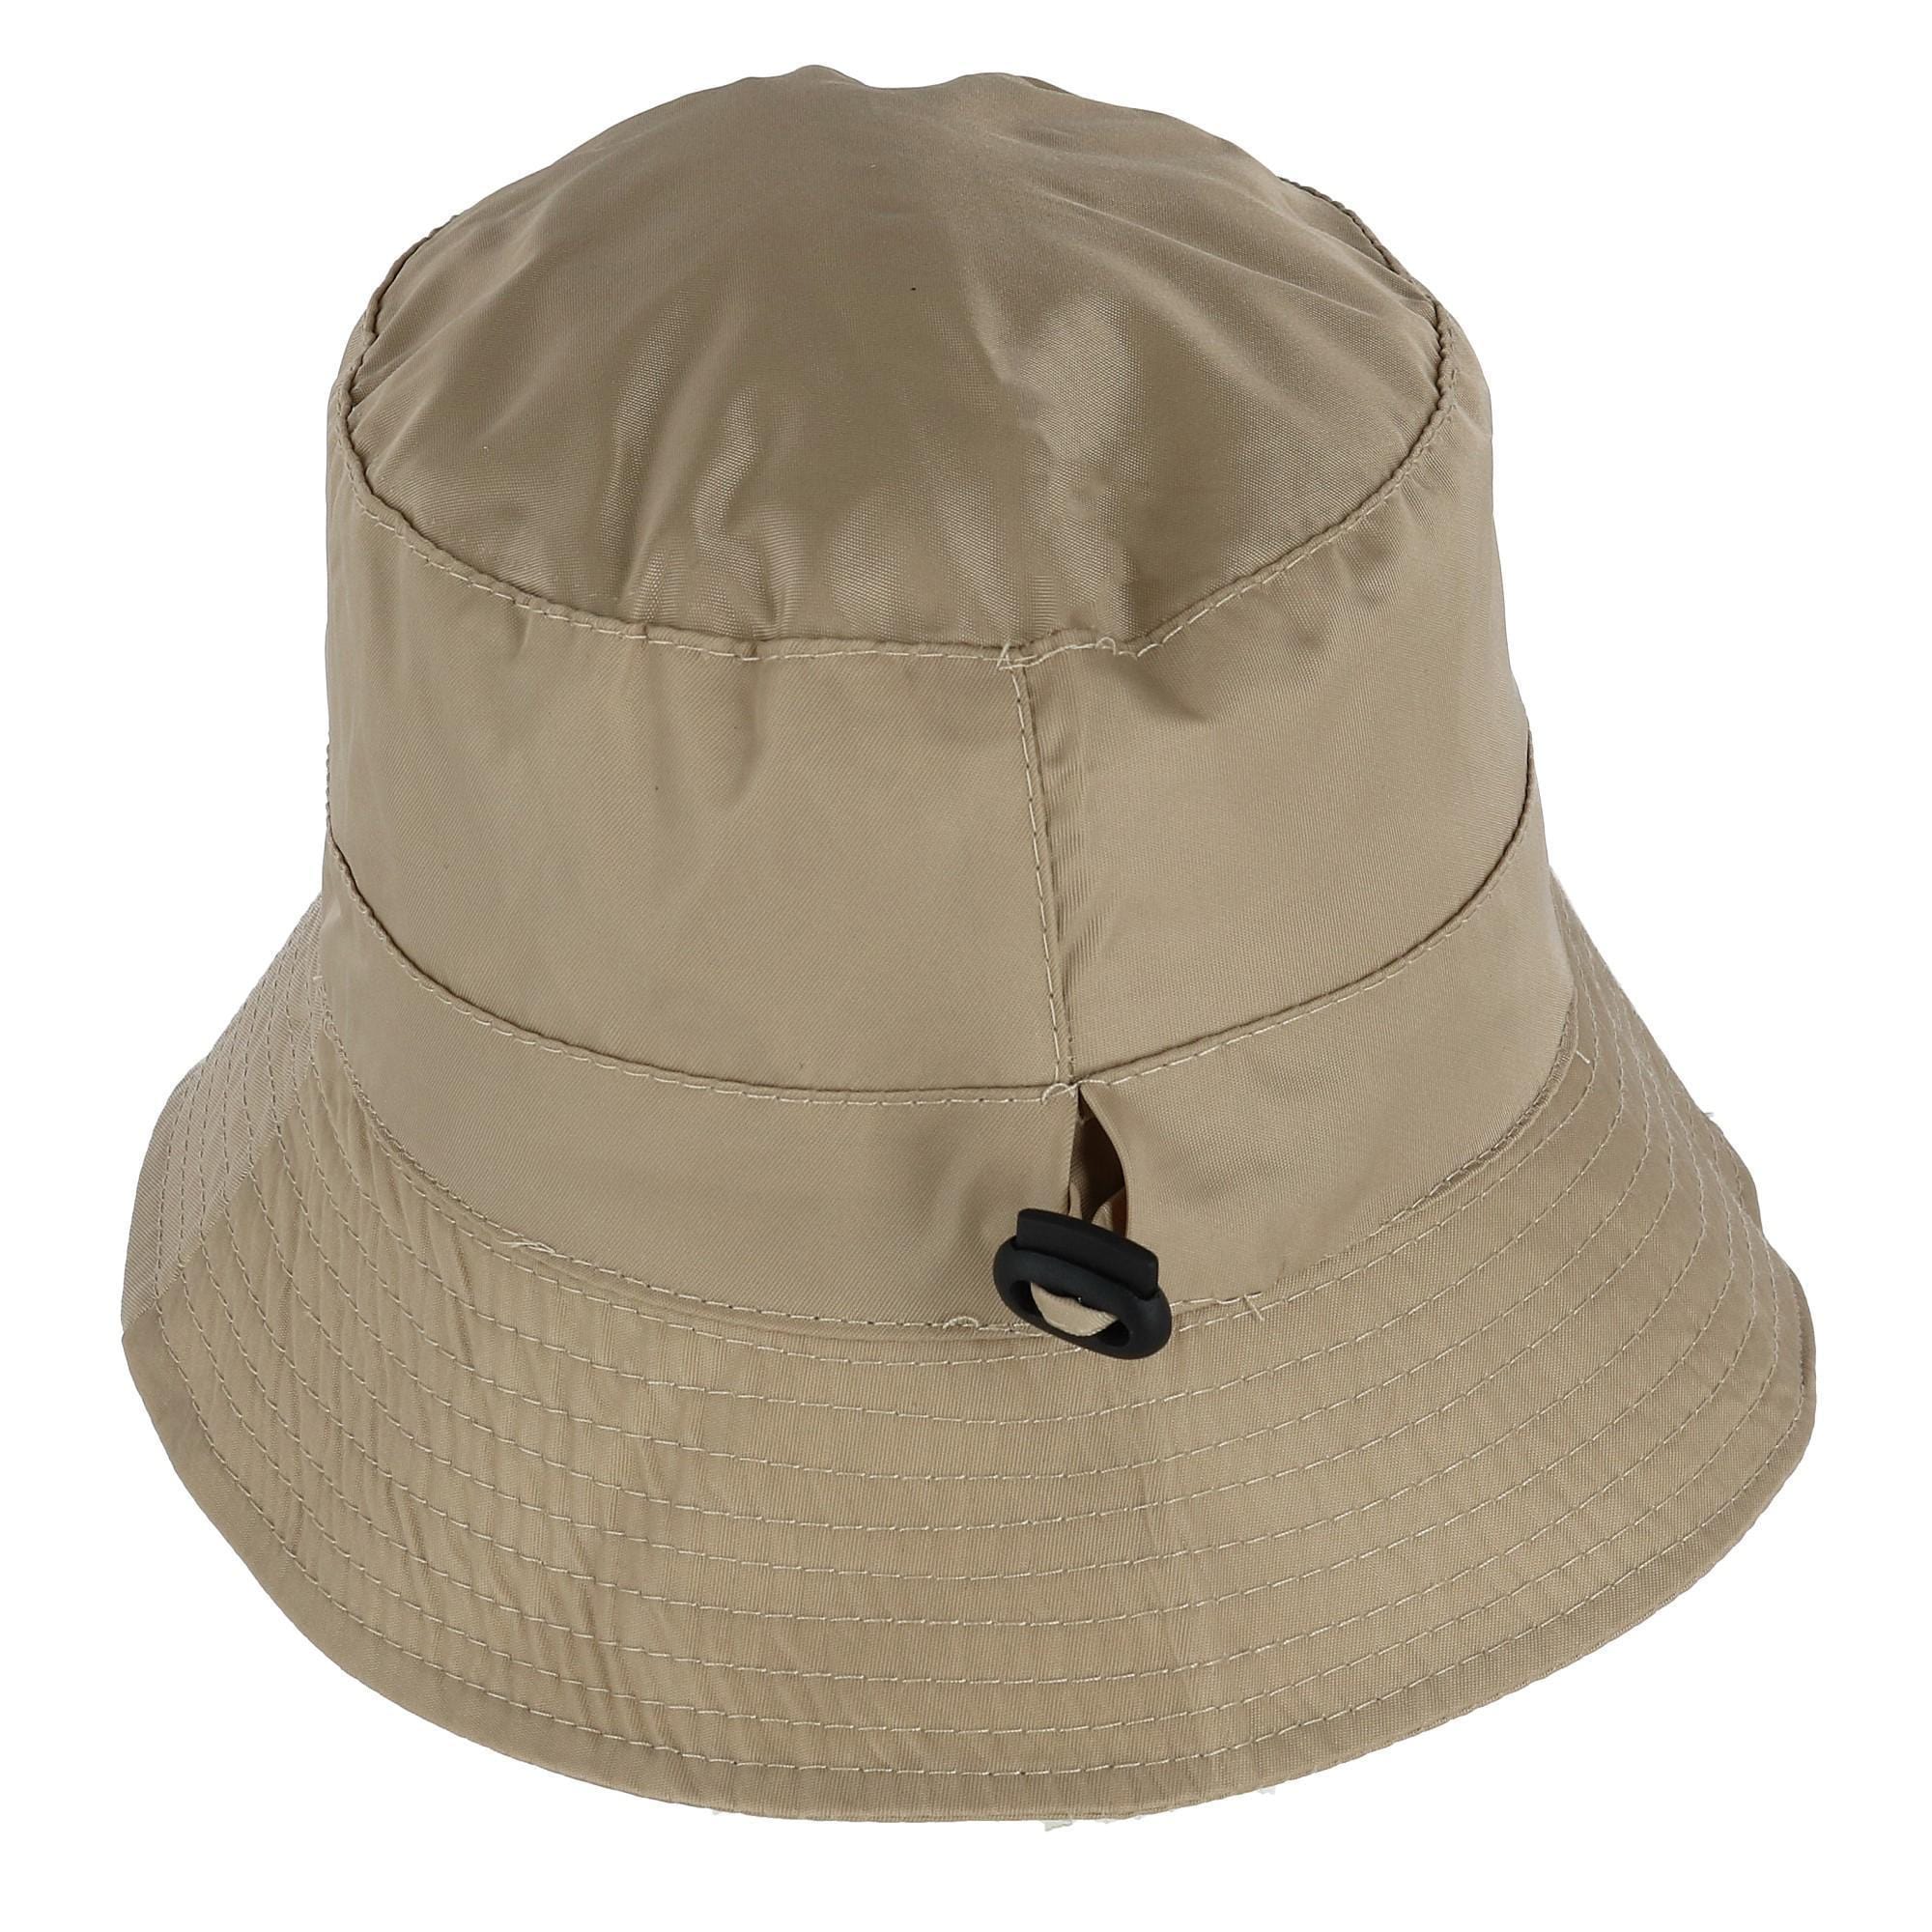 Waterproof Packable Rain Hat with Zippered Closure by Angela & William